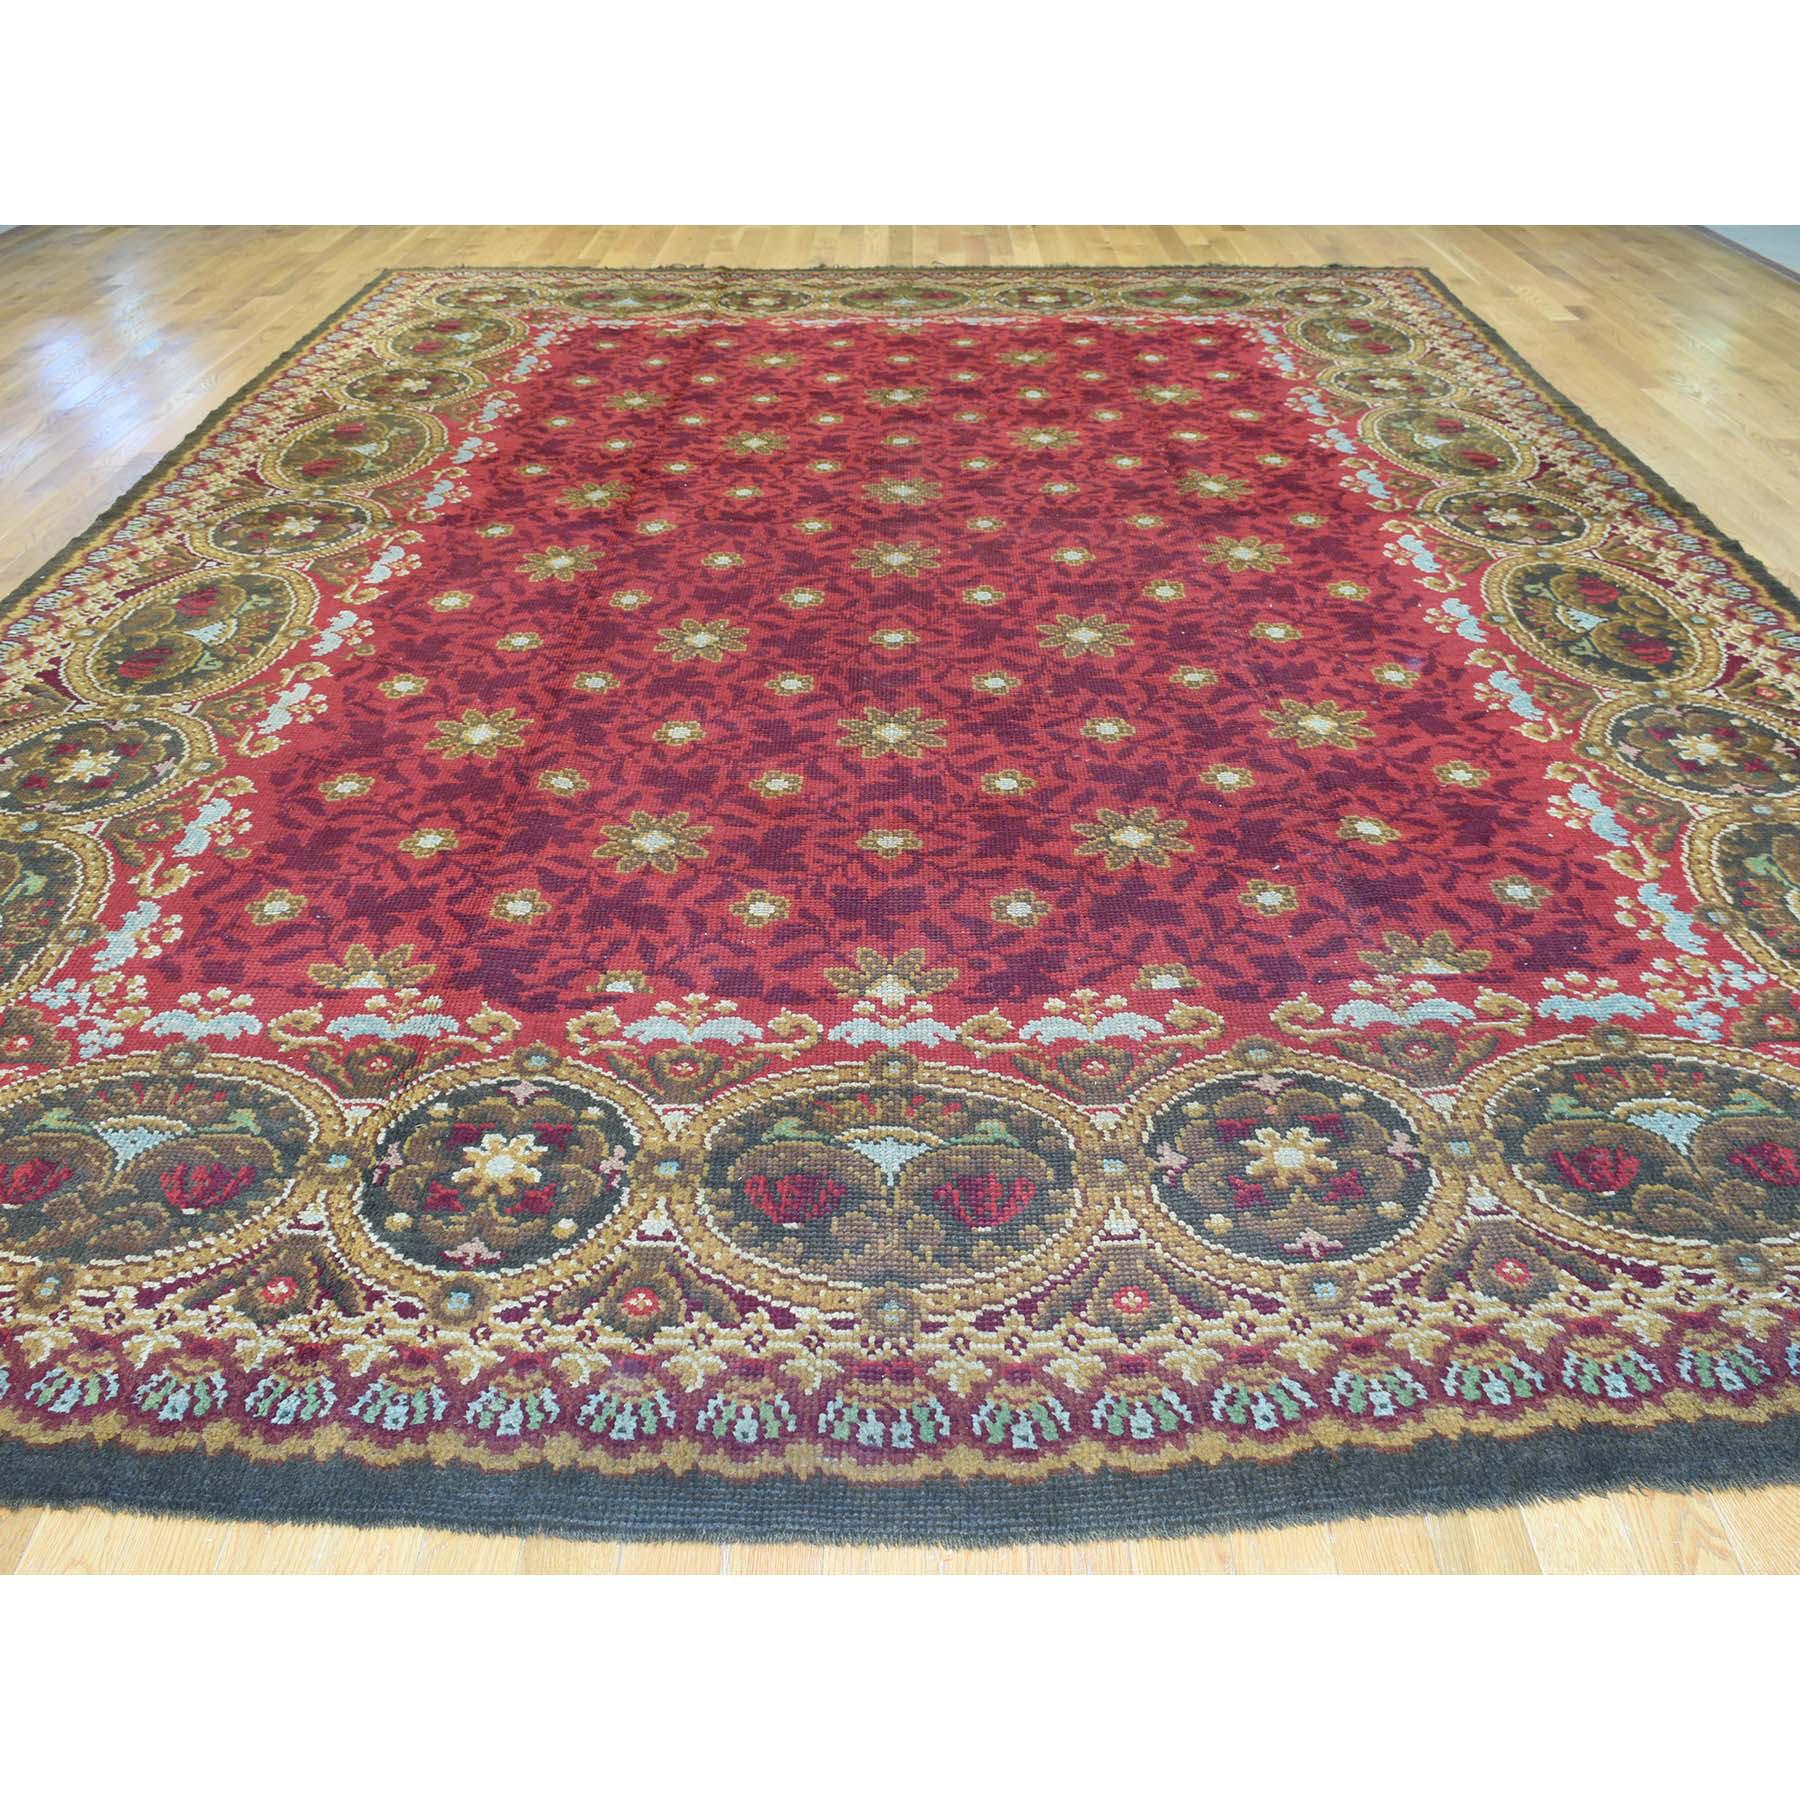 Antique European Donegal pure wool oversize Oriental rug. Measures: 10'10